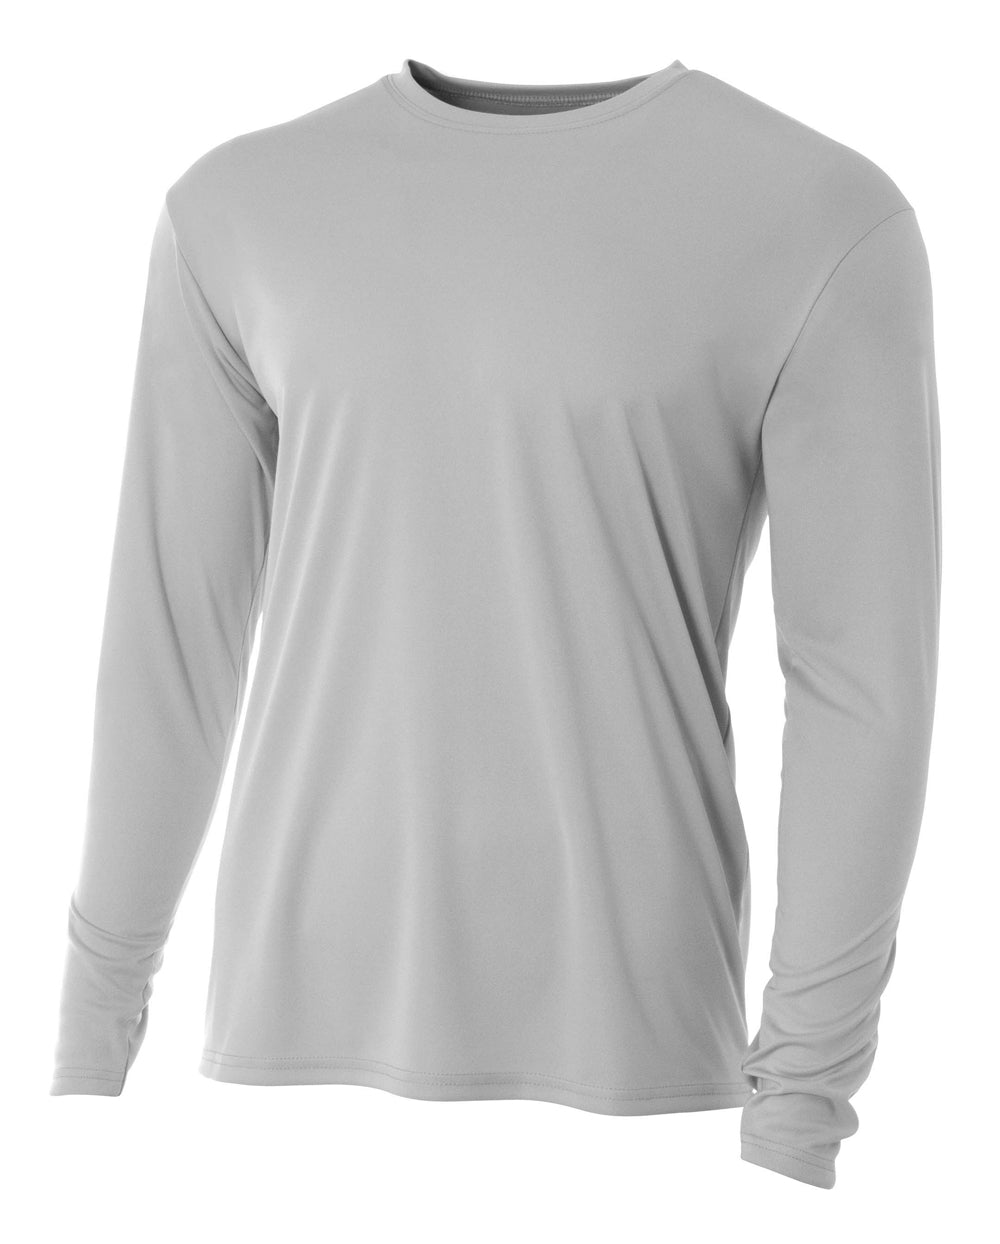 Silver 2011 A4 Cooling Performance Long Sleeve Crew